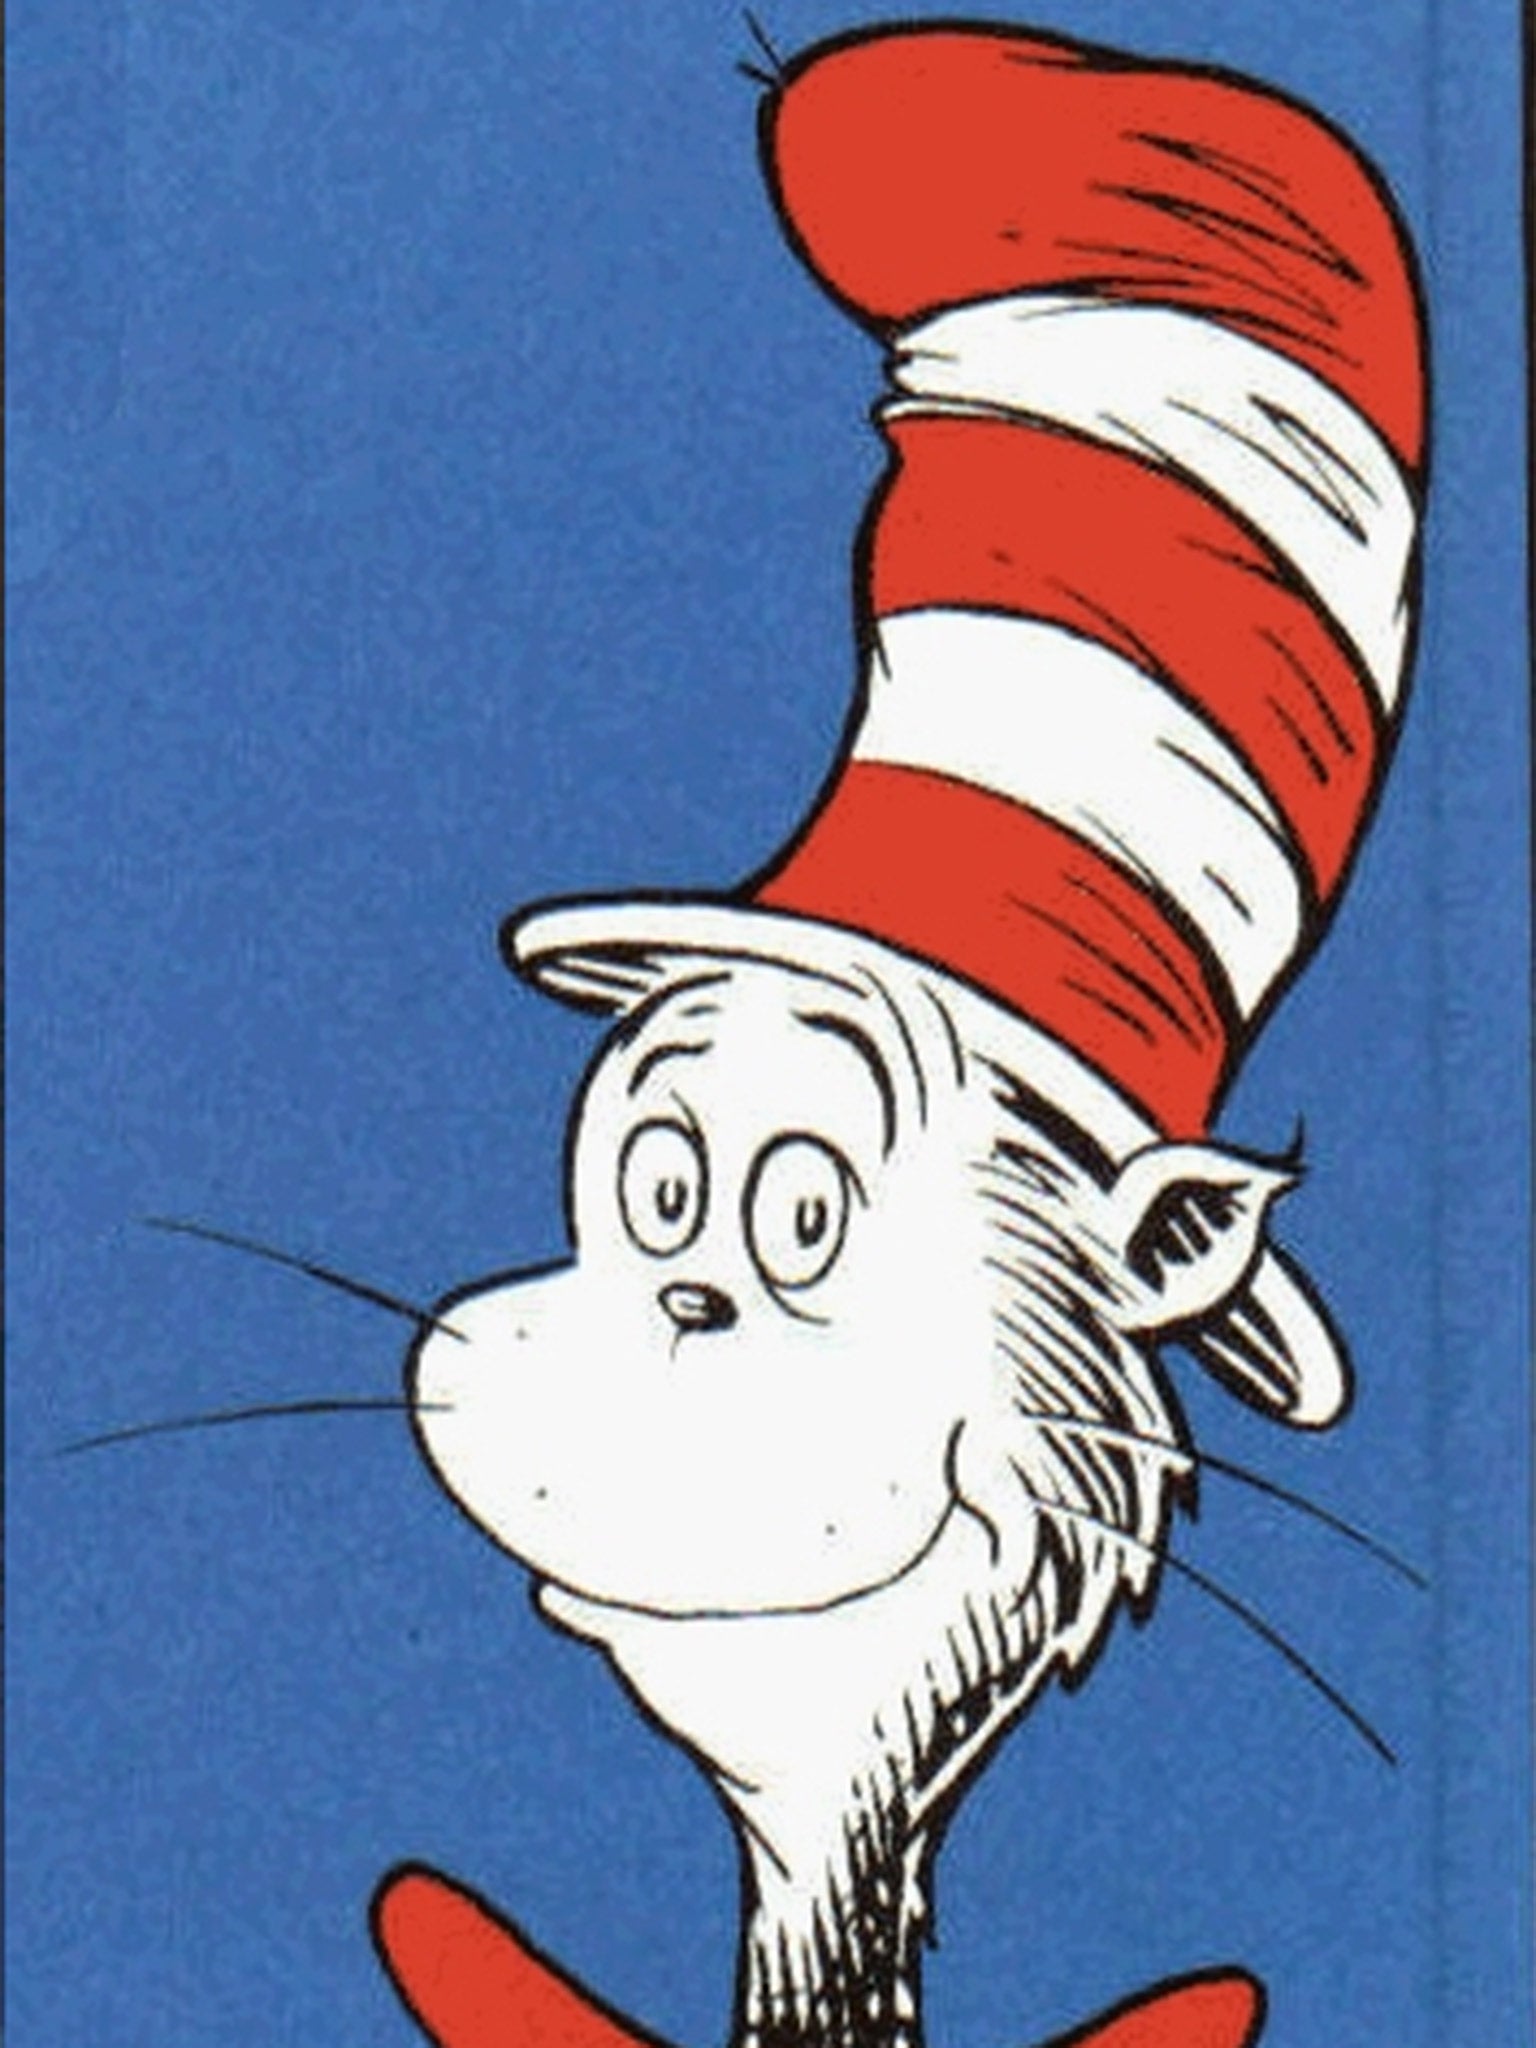 The Cat in the Hat has sold at least 10.5 million copies